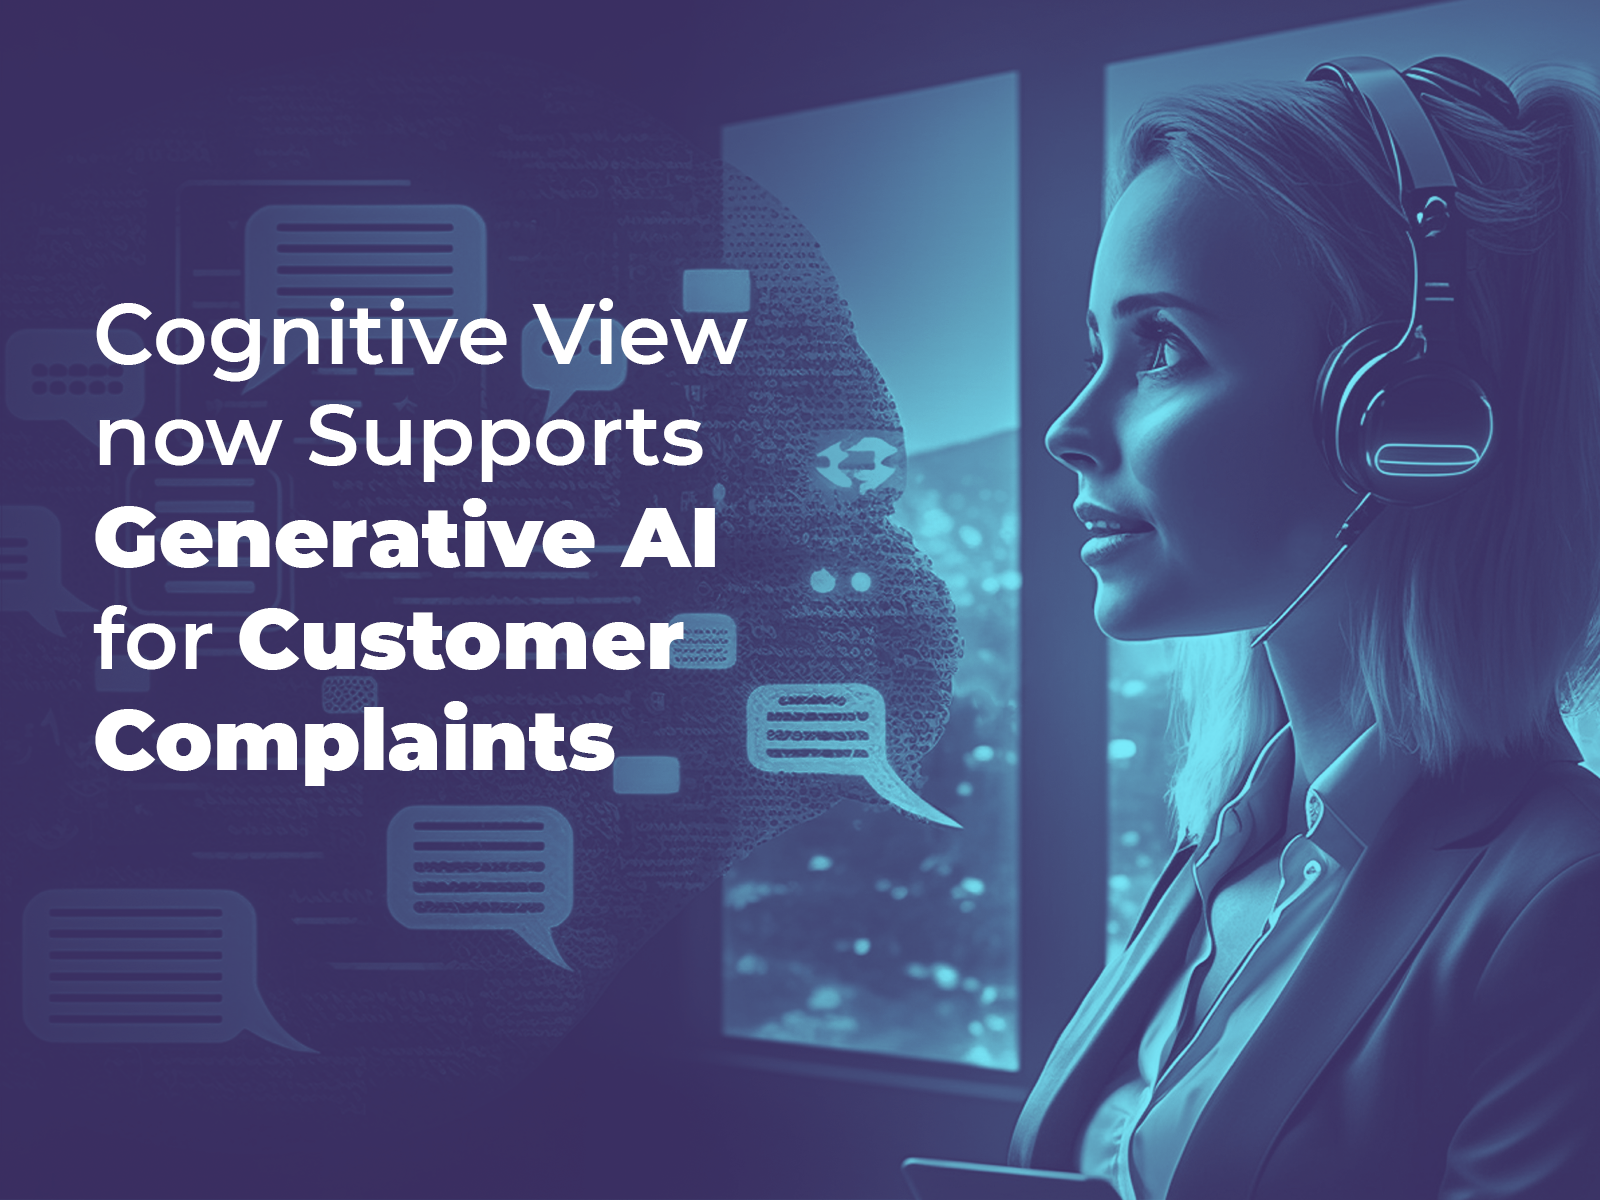 Cognitive View Supports Generative AI for customer complaints.